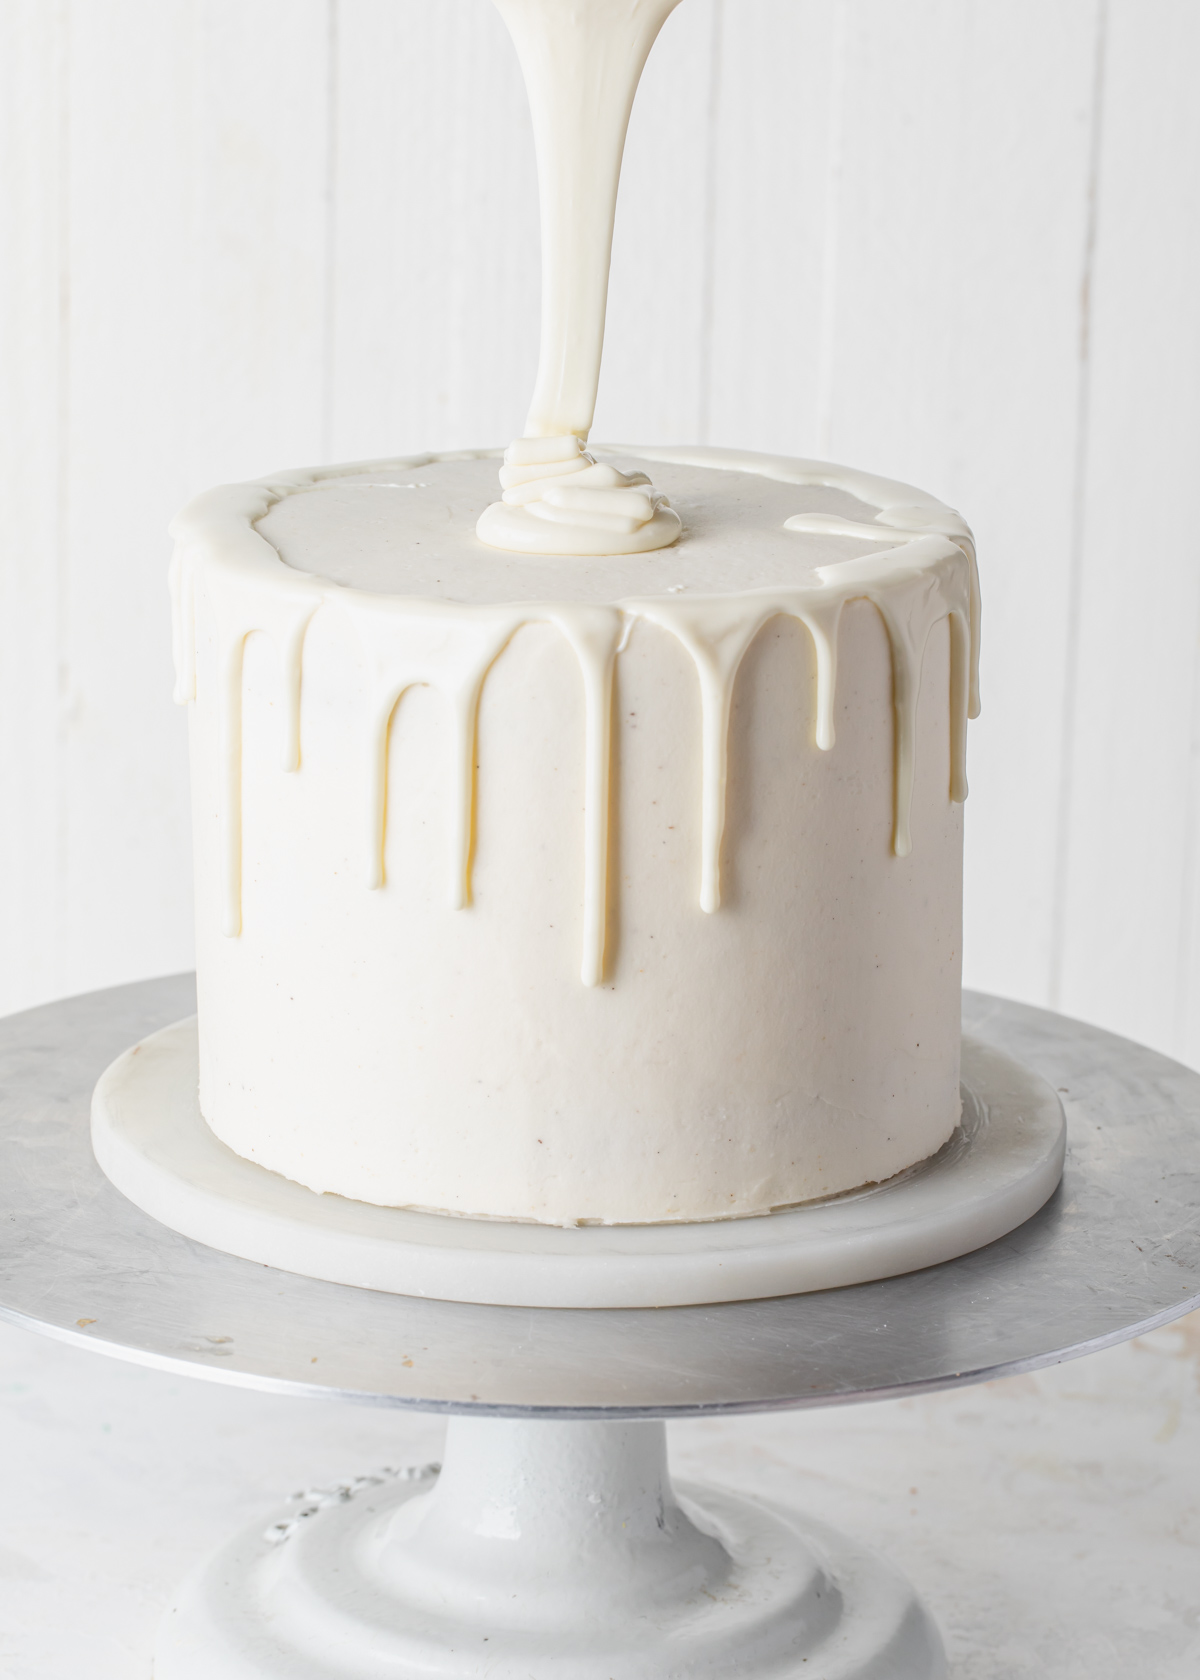 Pour white chocolate ganache on top of a drip cake